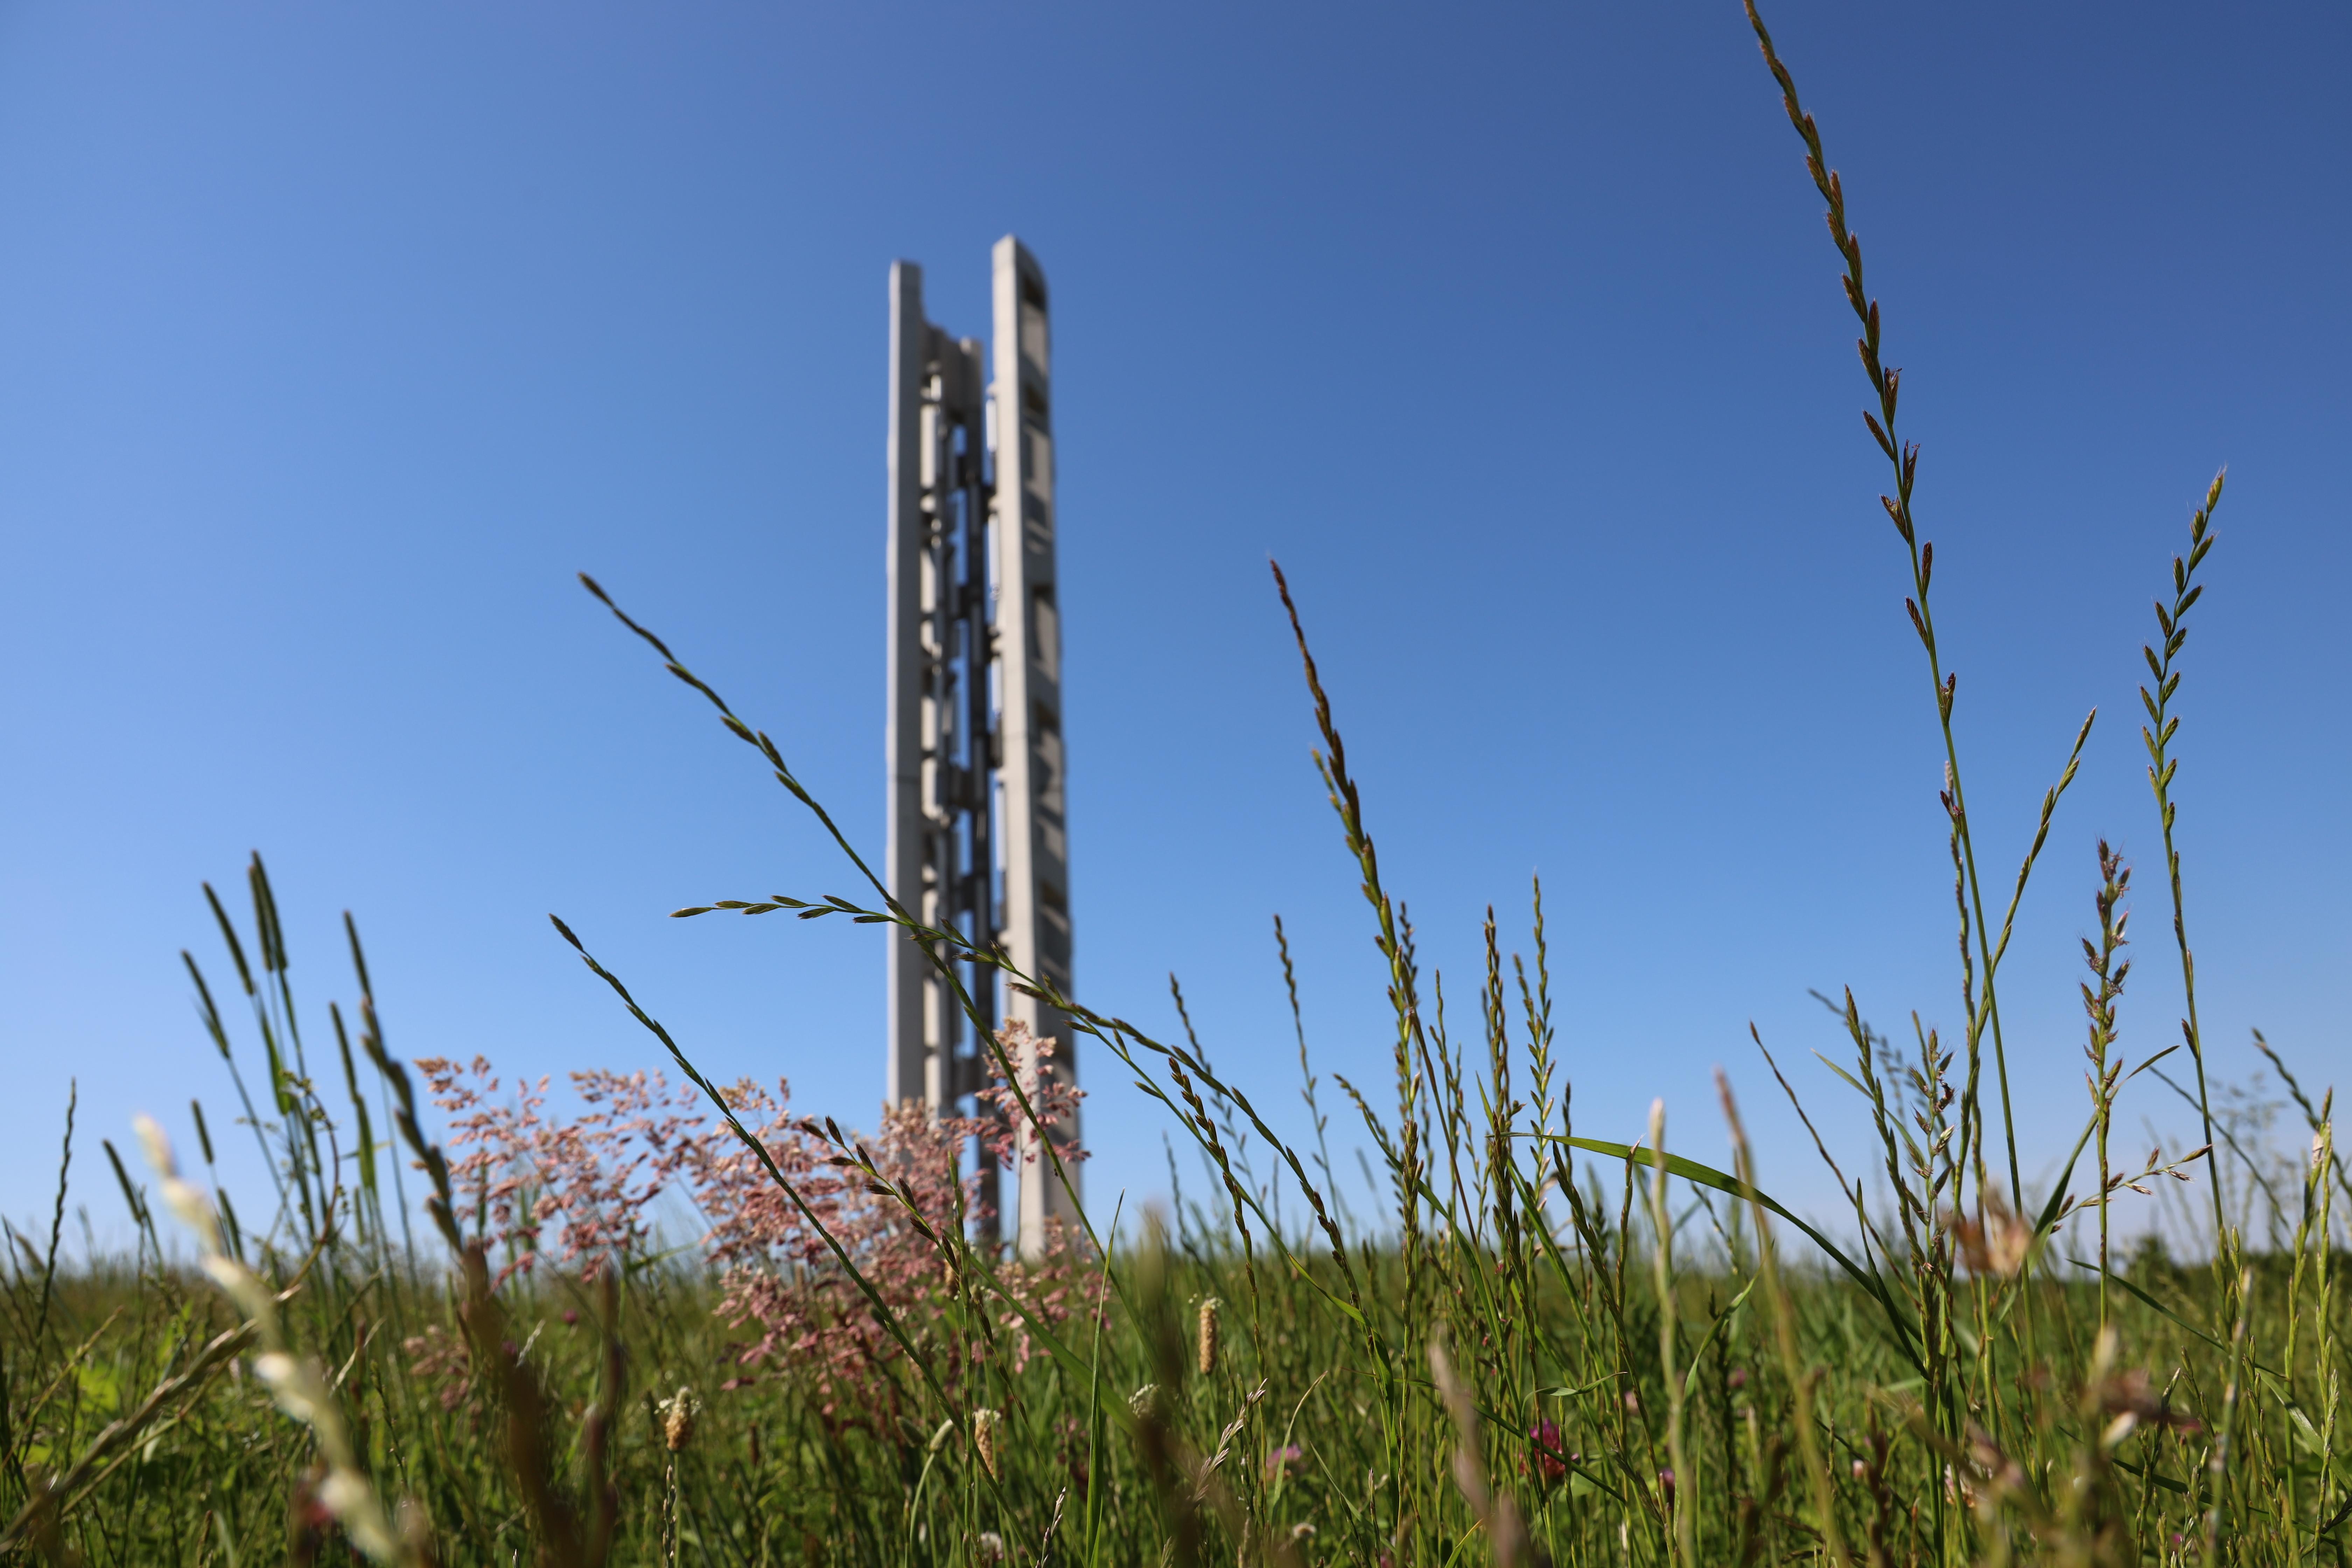 Wildflower and tall grass with the Tower of Voices behind.